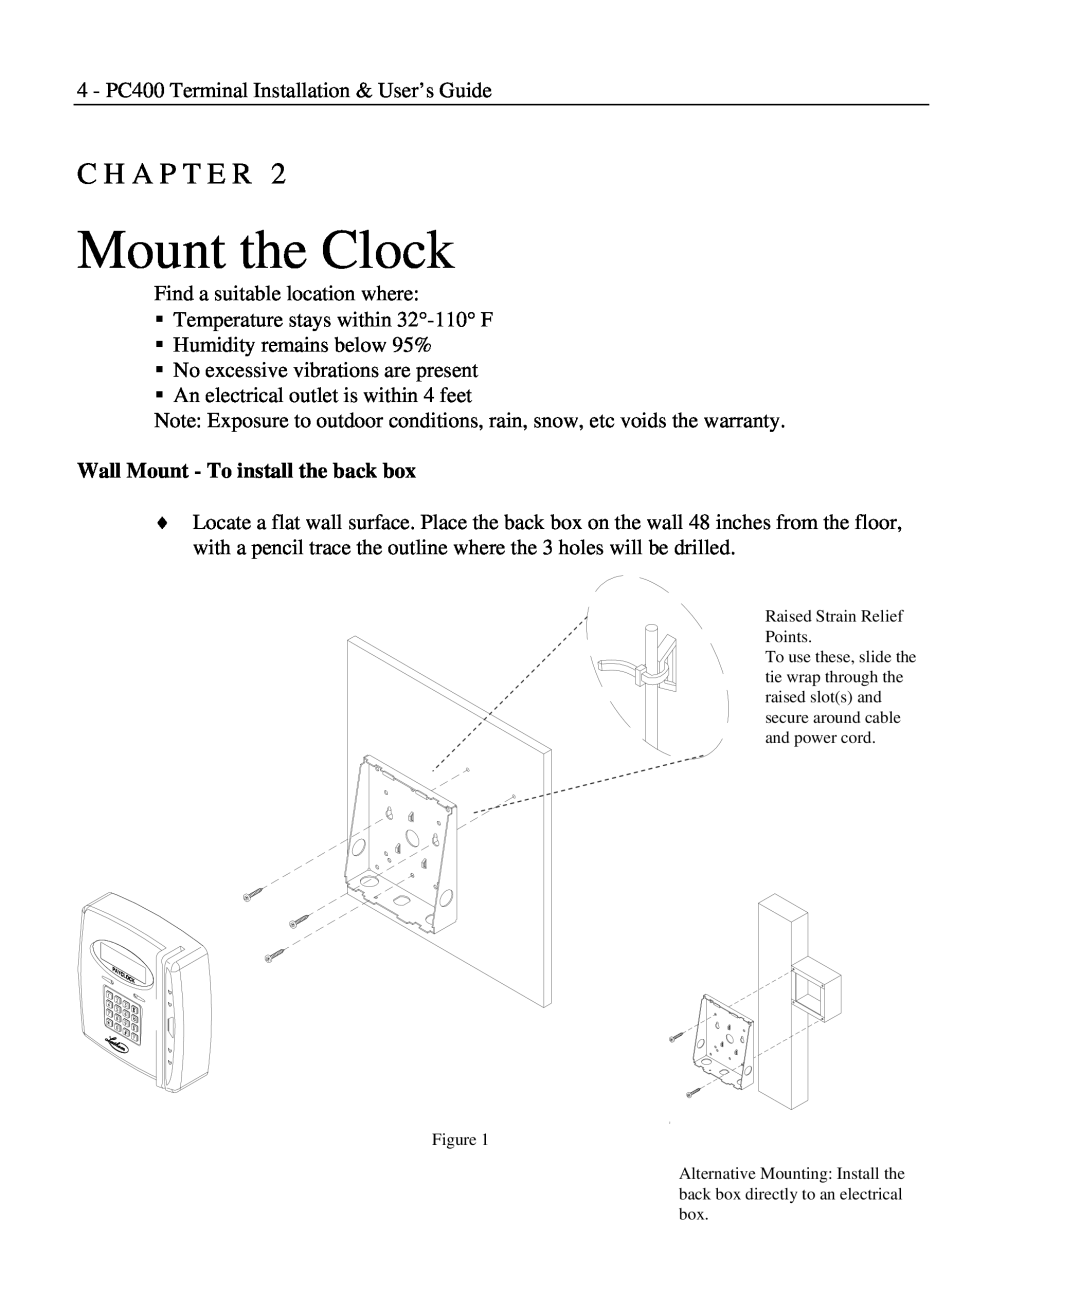 Lathem PC400TX manual Mount the Clock, Wall Mount - To install the back box, C H A P T E R 